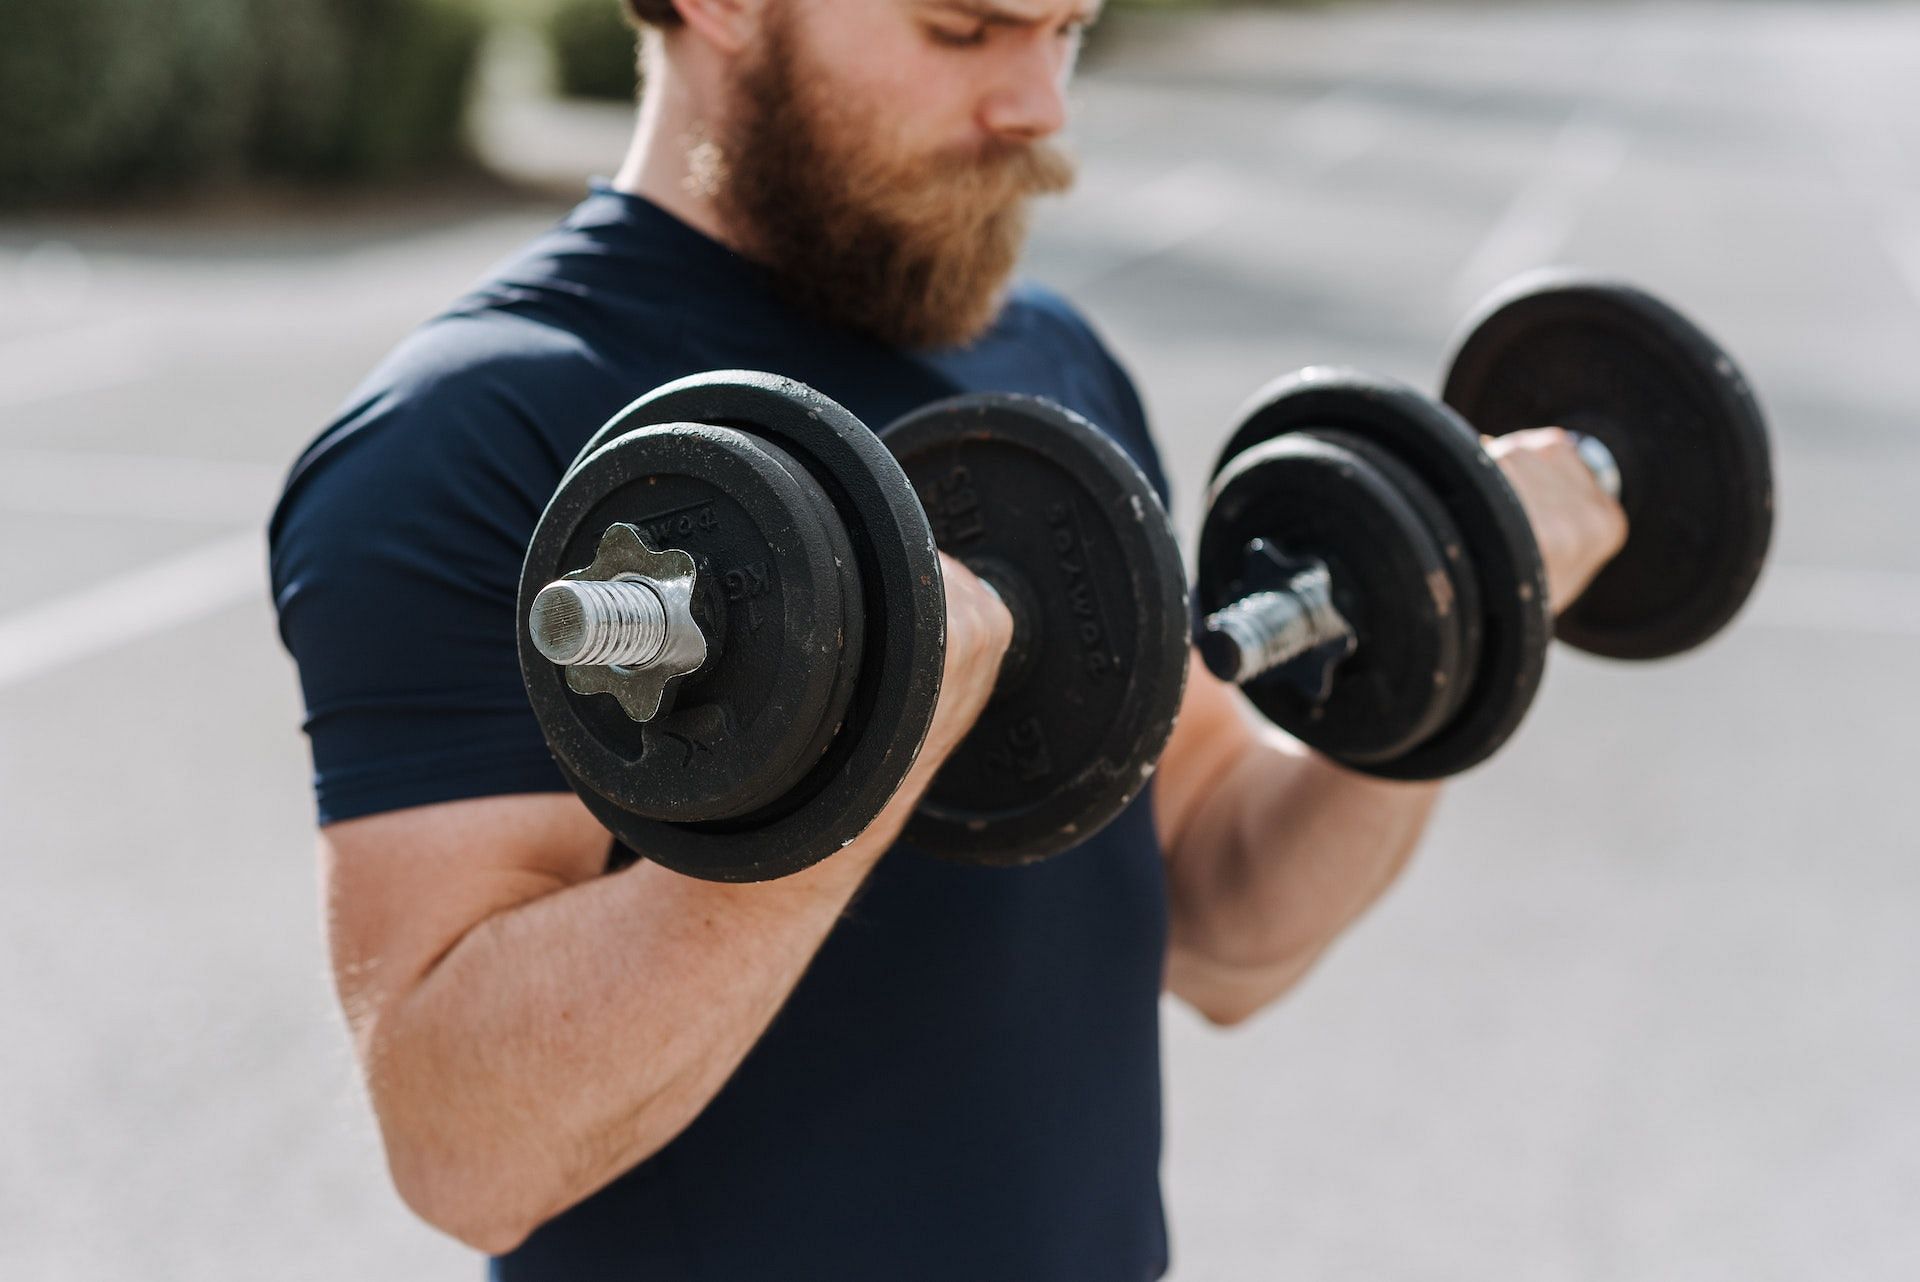 Dumbbell upright row builds strength in the chest and upper back. (Photo via Pexels/Anete Lusina)